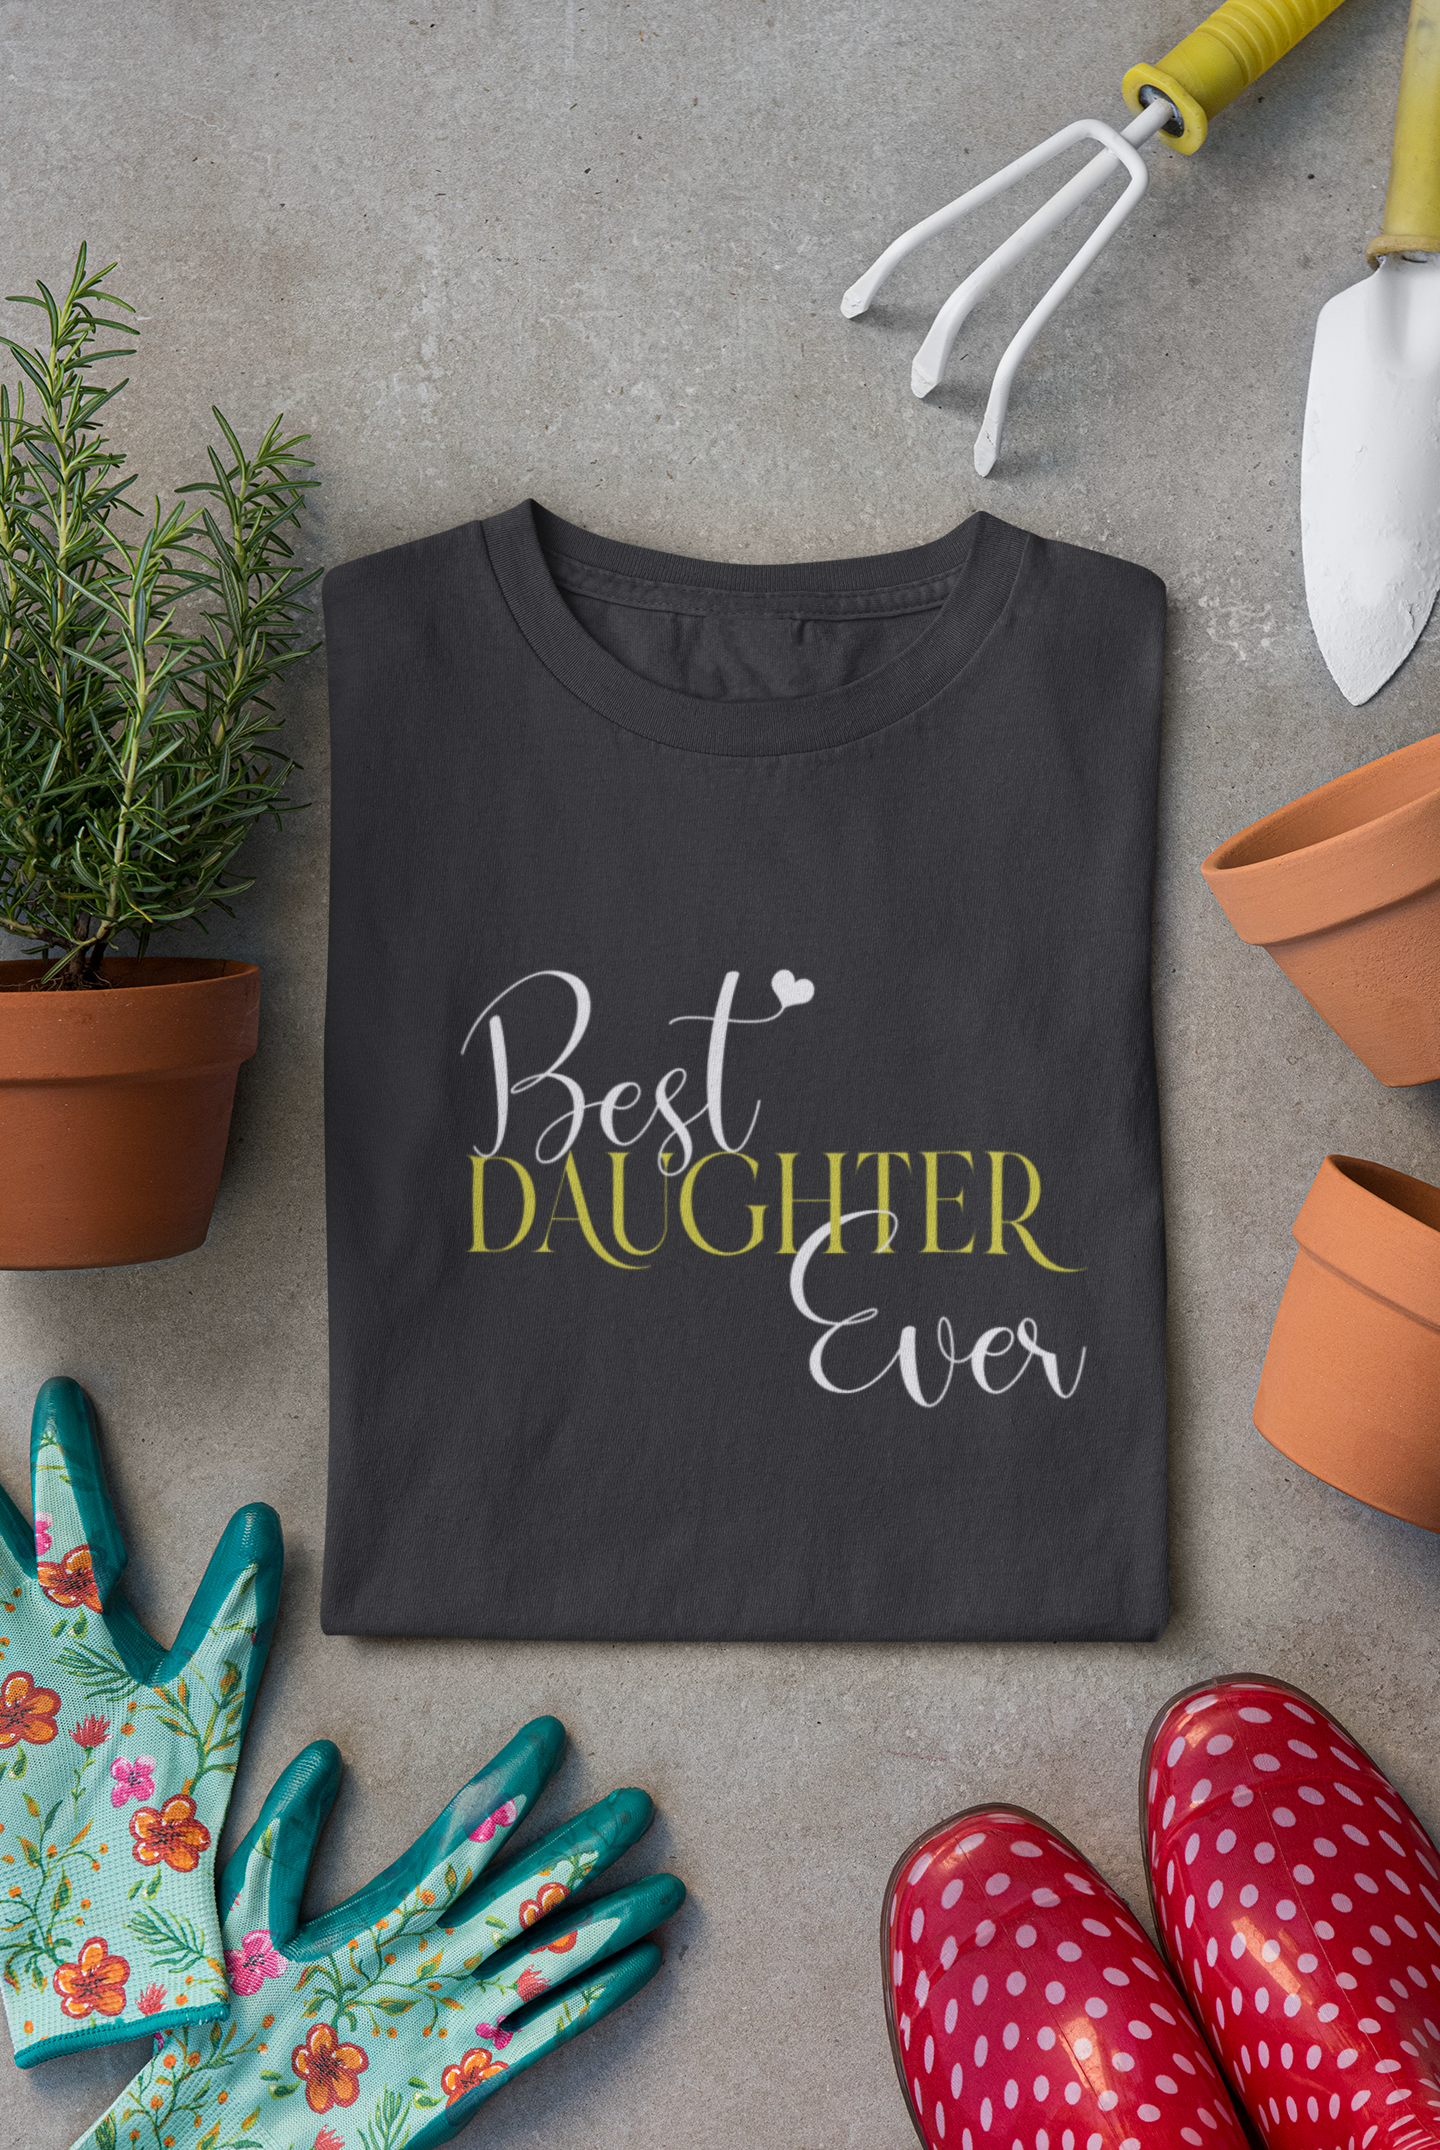 Best Dad Ever Father and Daughter Black Matching T-Shirt- FunkyTradition